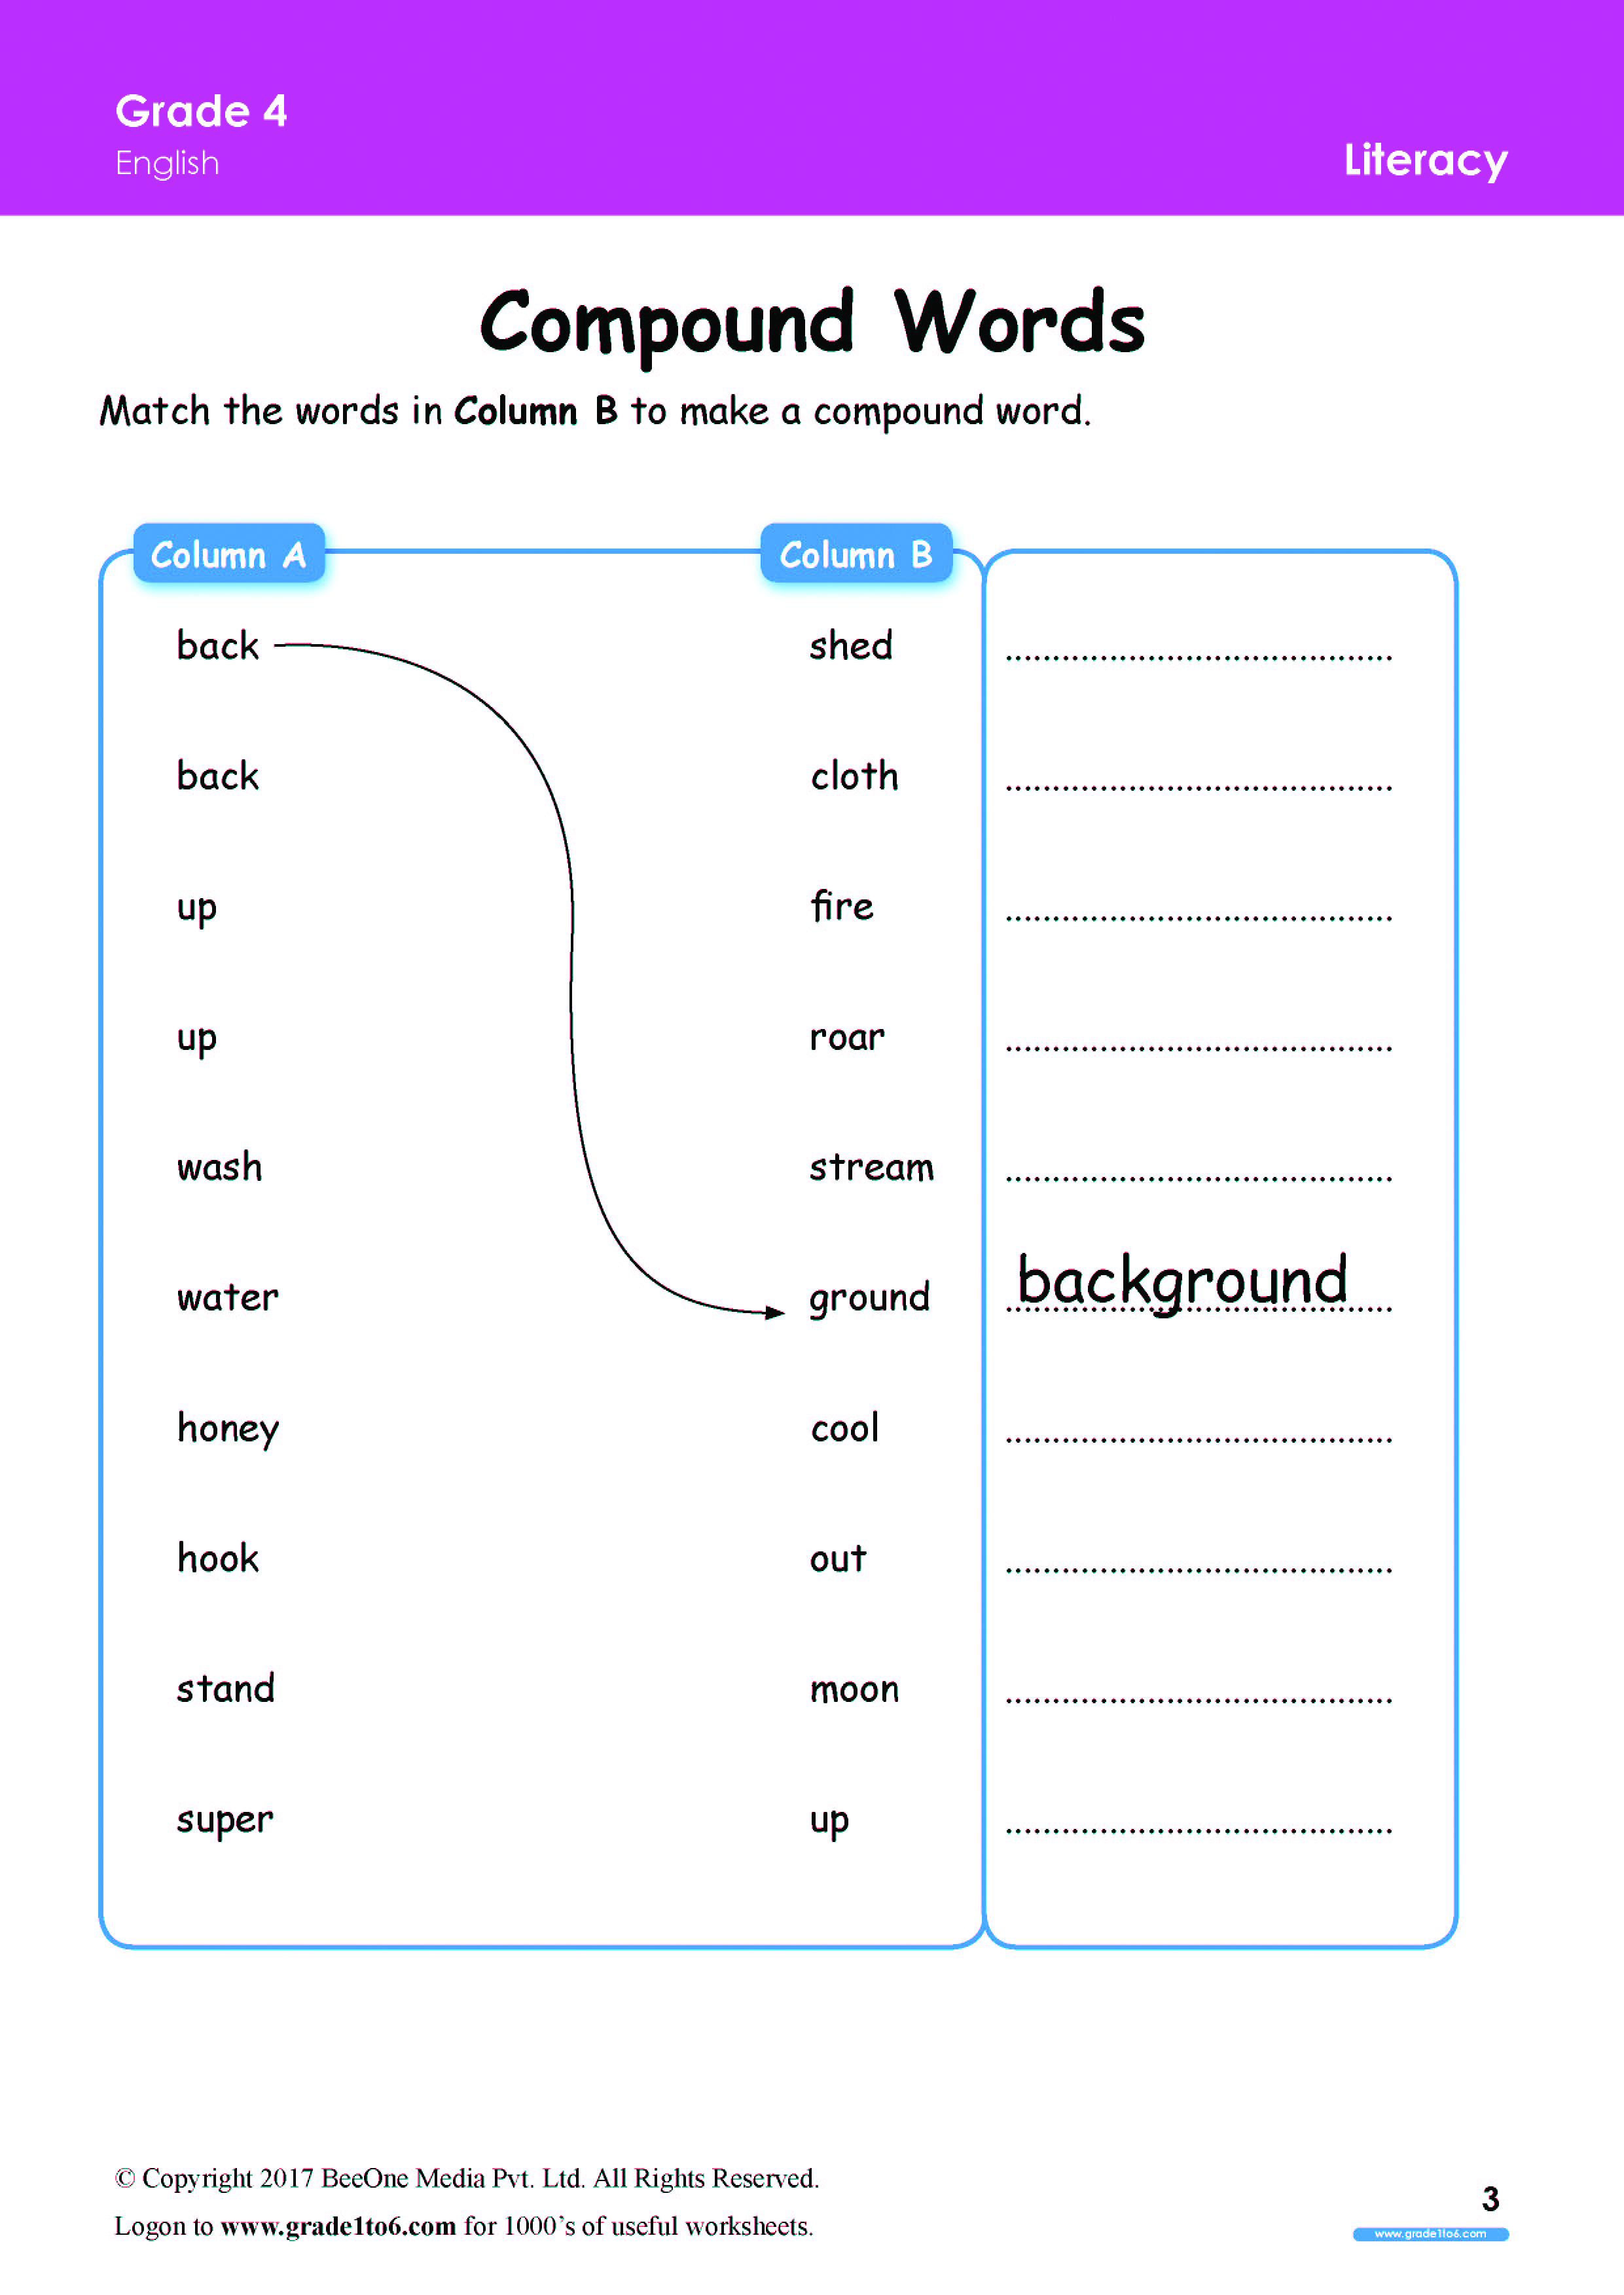 Compound words worksheets for Grade 4|www.grade1to6.com